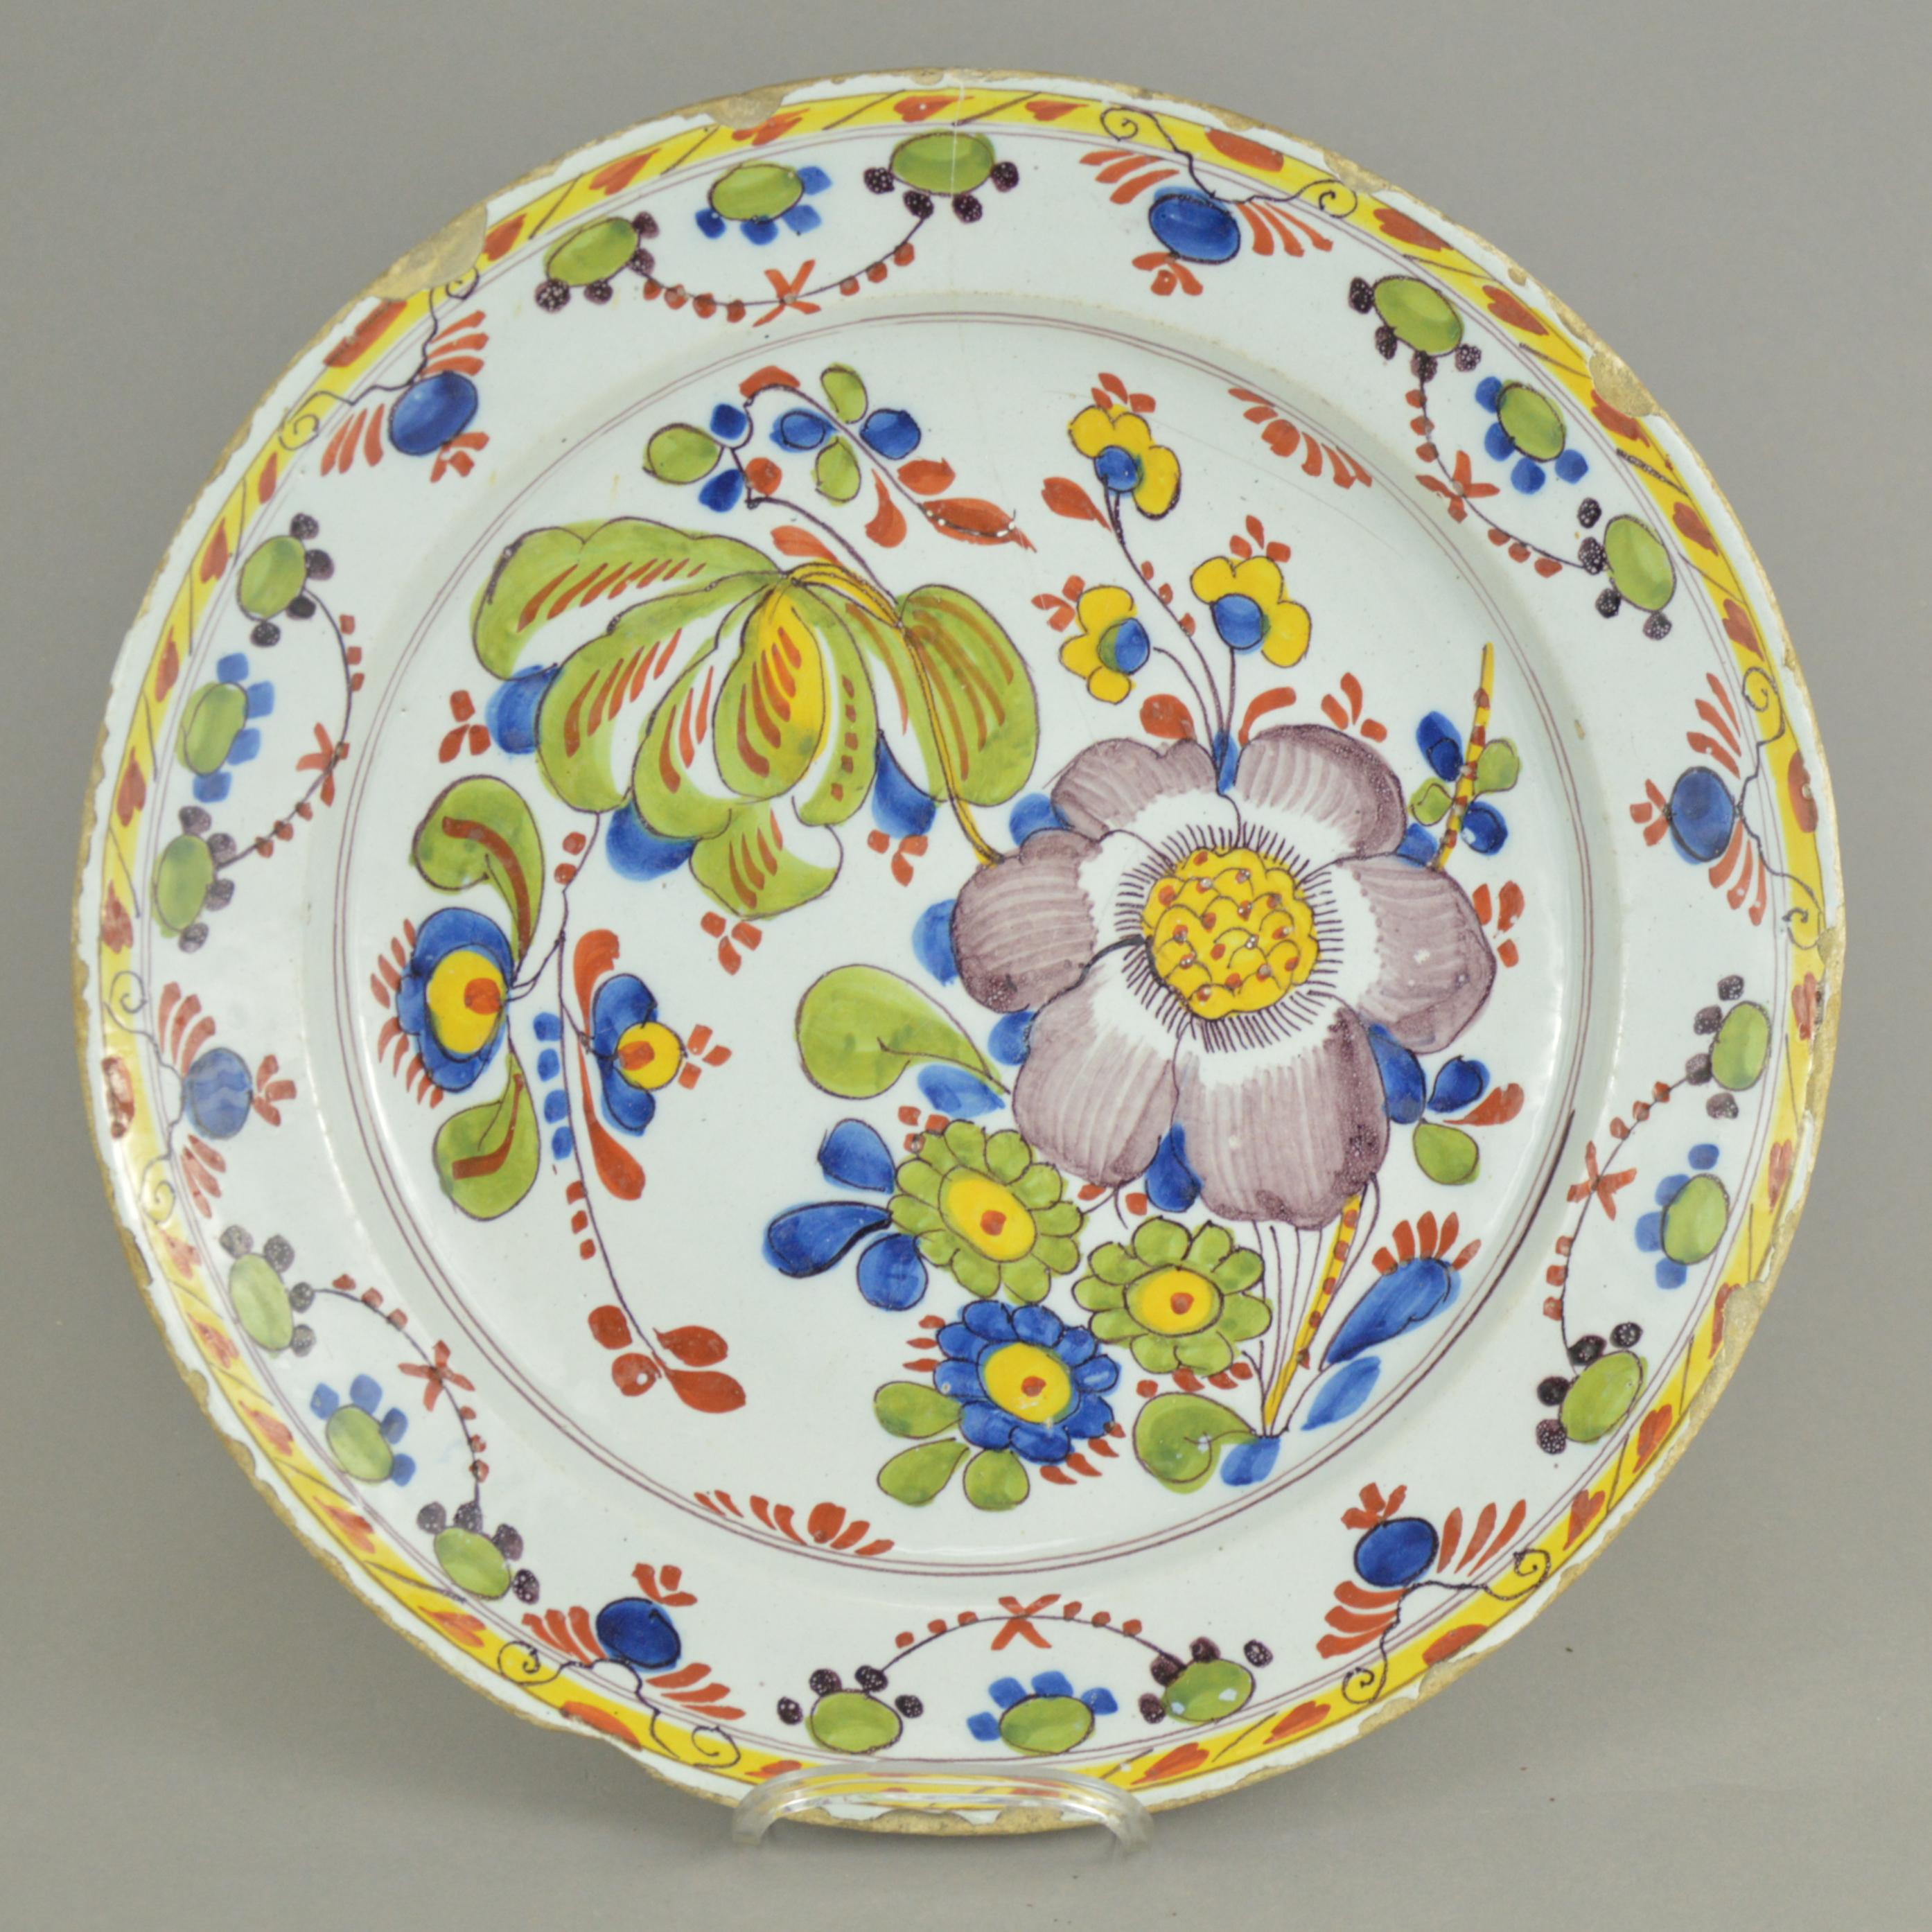 Pair of large decorative polychrome Delft faience plates. Central part of each is richly decorated with flowers.
Measure: Diameter - 35 cm.
Condition report: some chips on the rims, one plate has a crack.